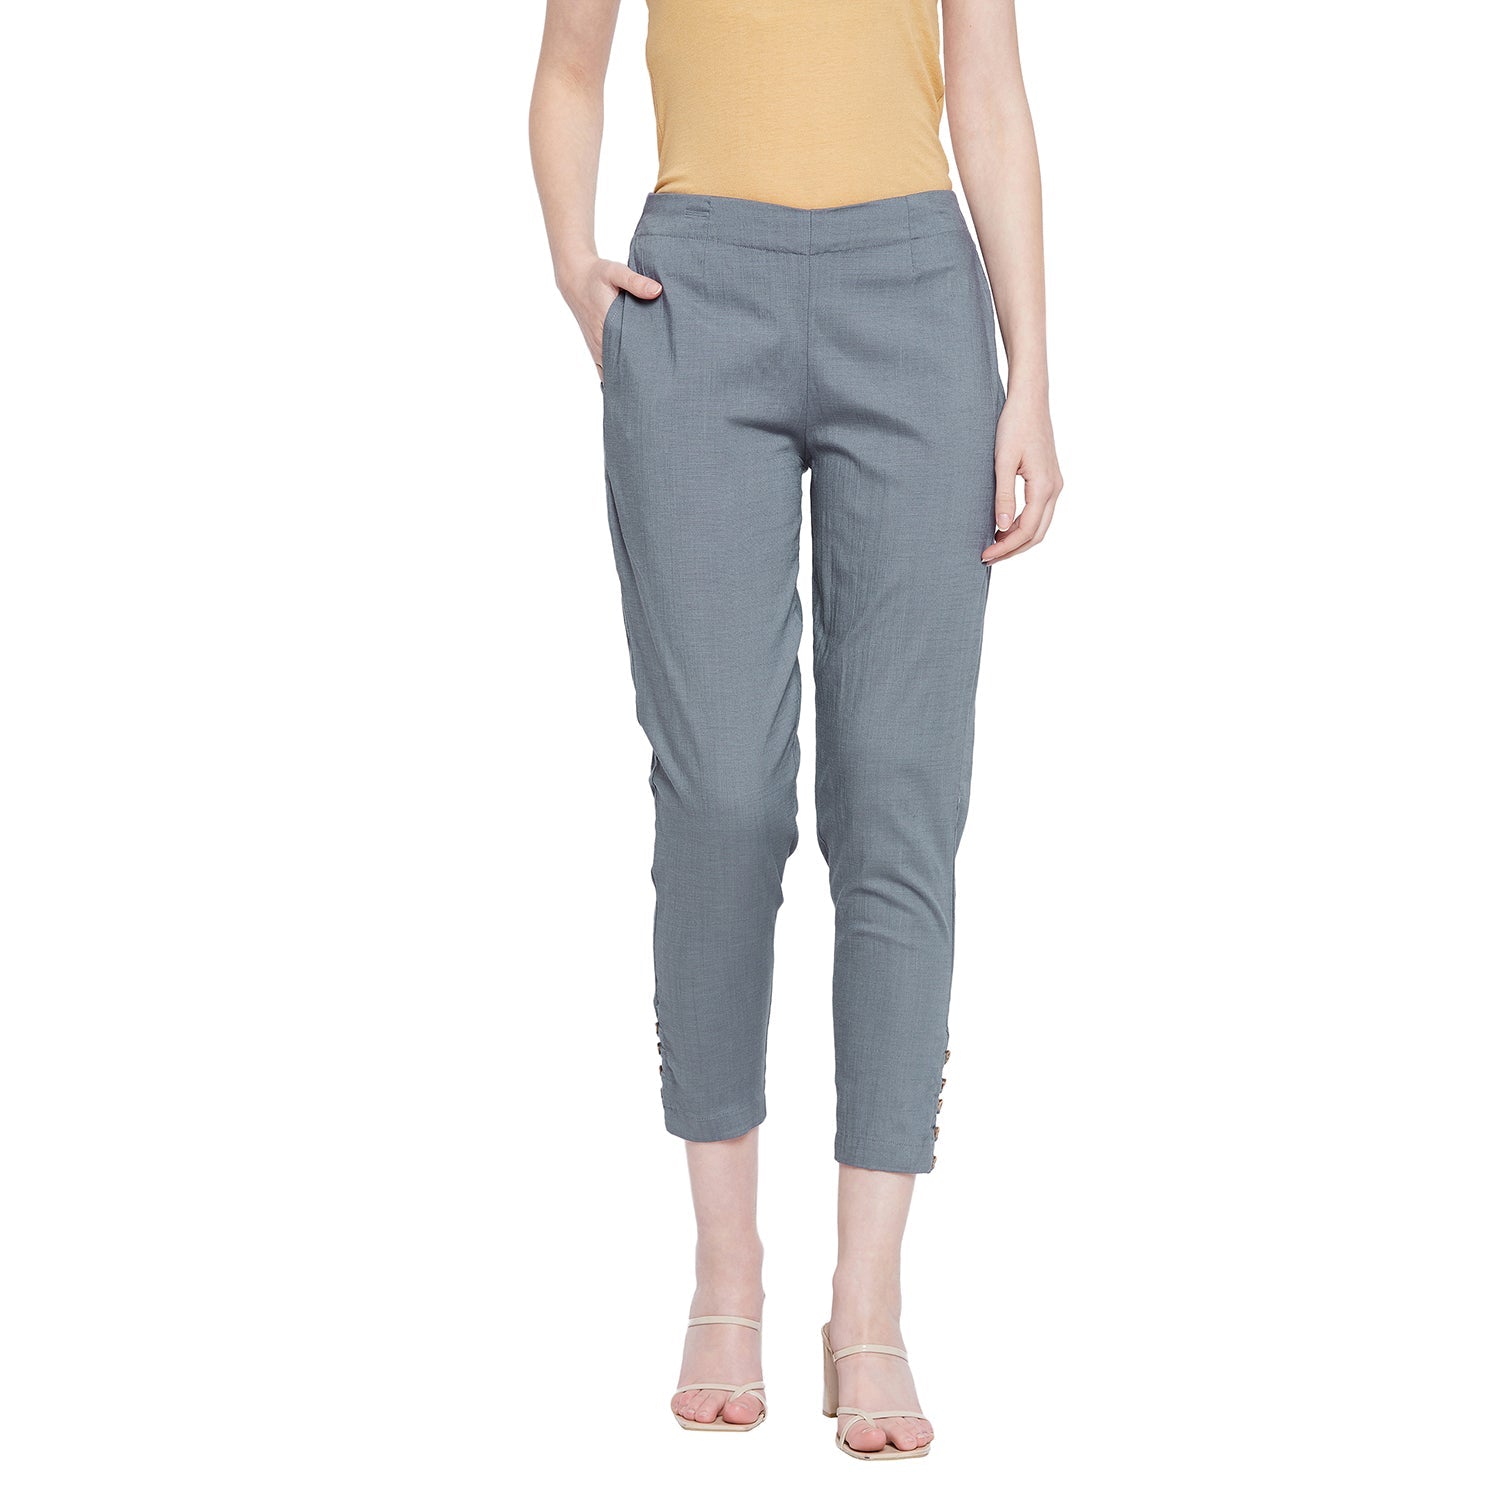 Tailored trousers - Light grey marl/Pinstriped - Ladies | H&M IN